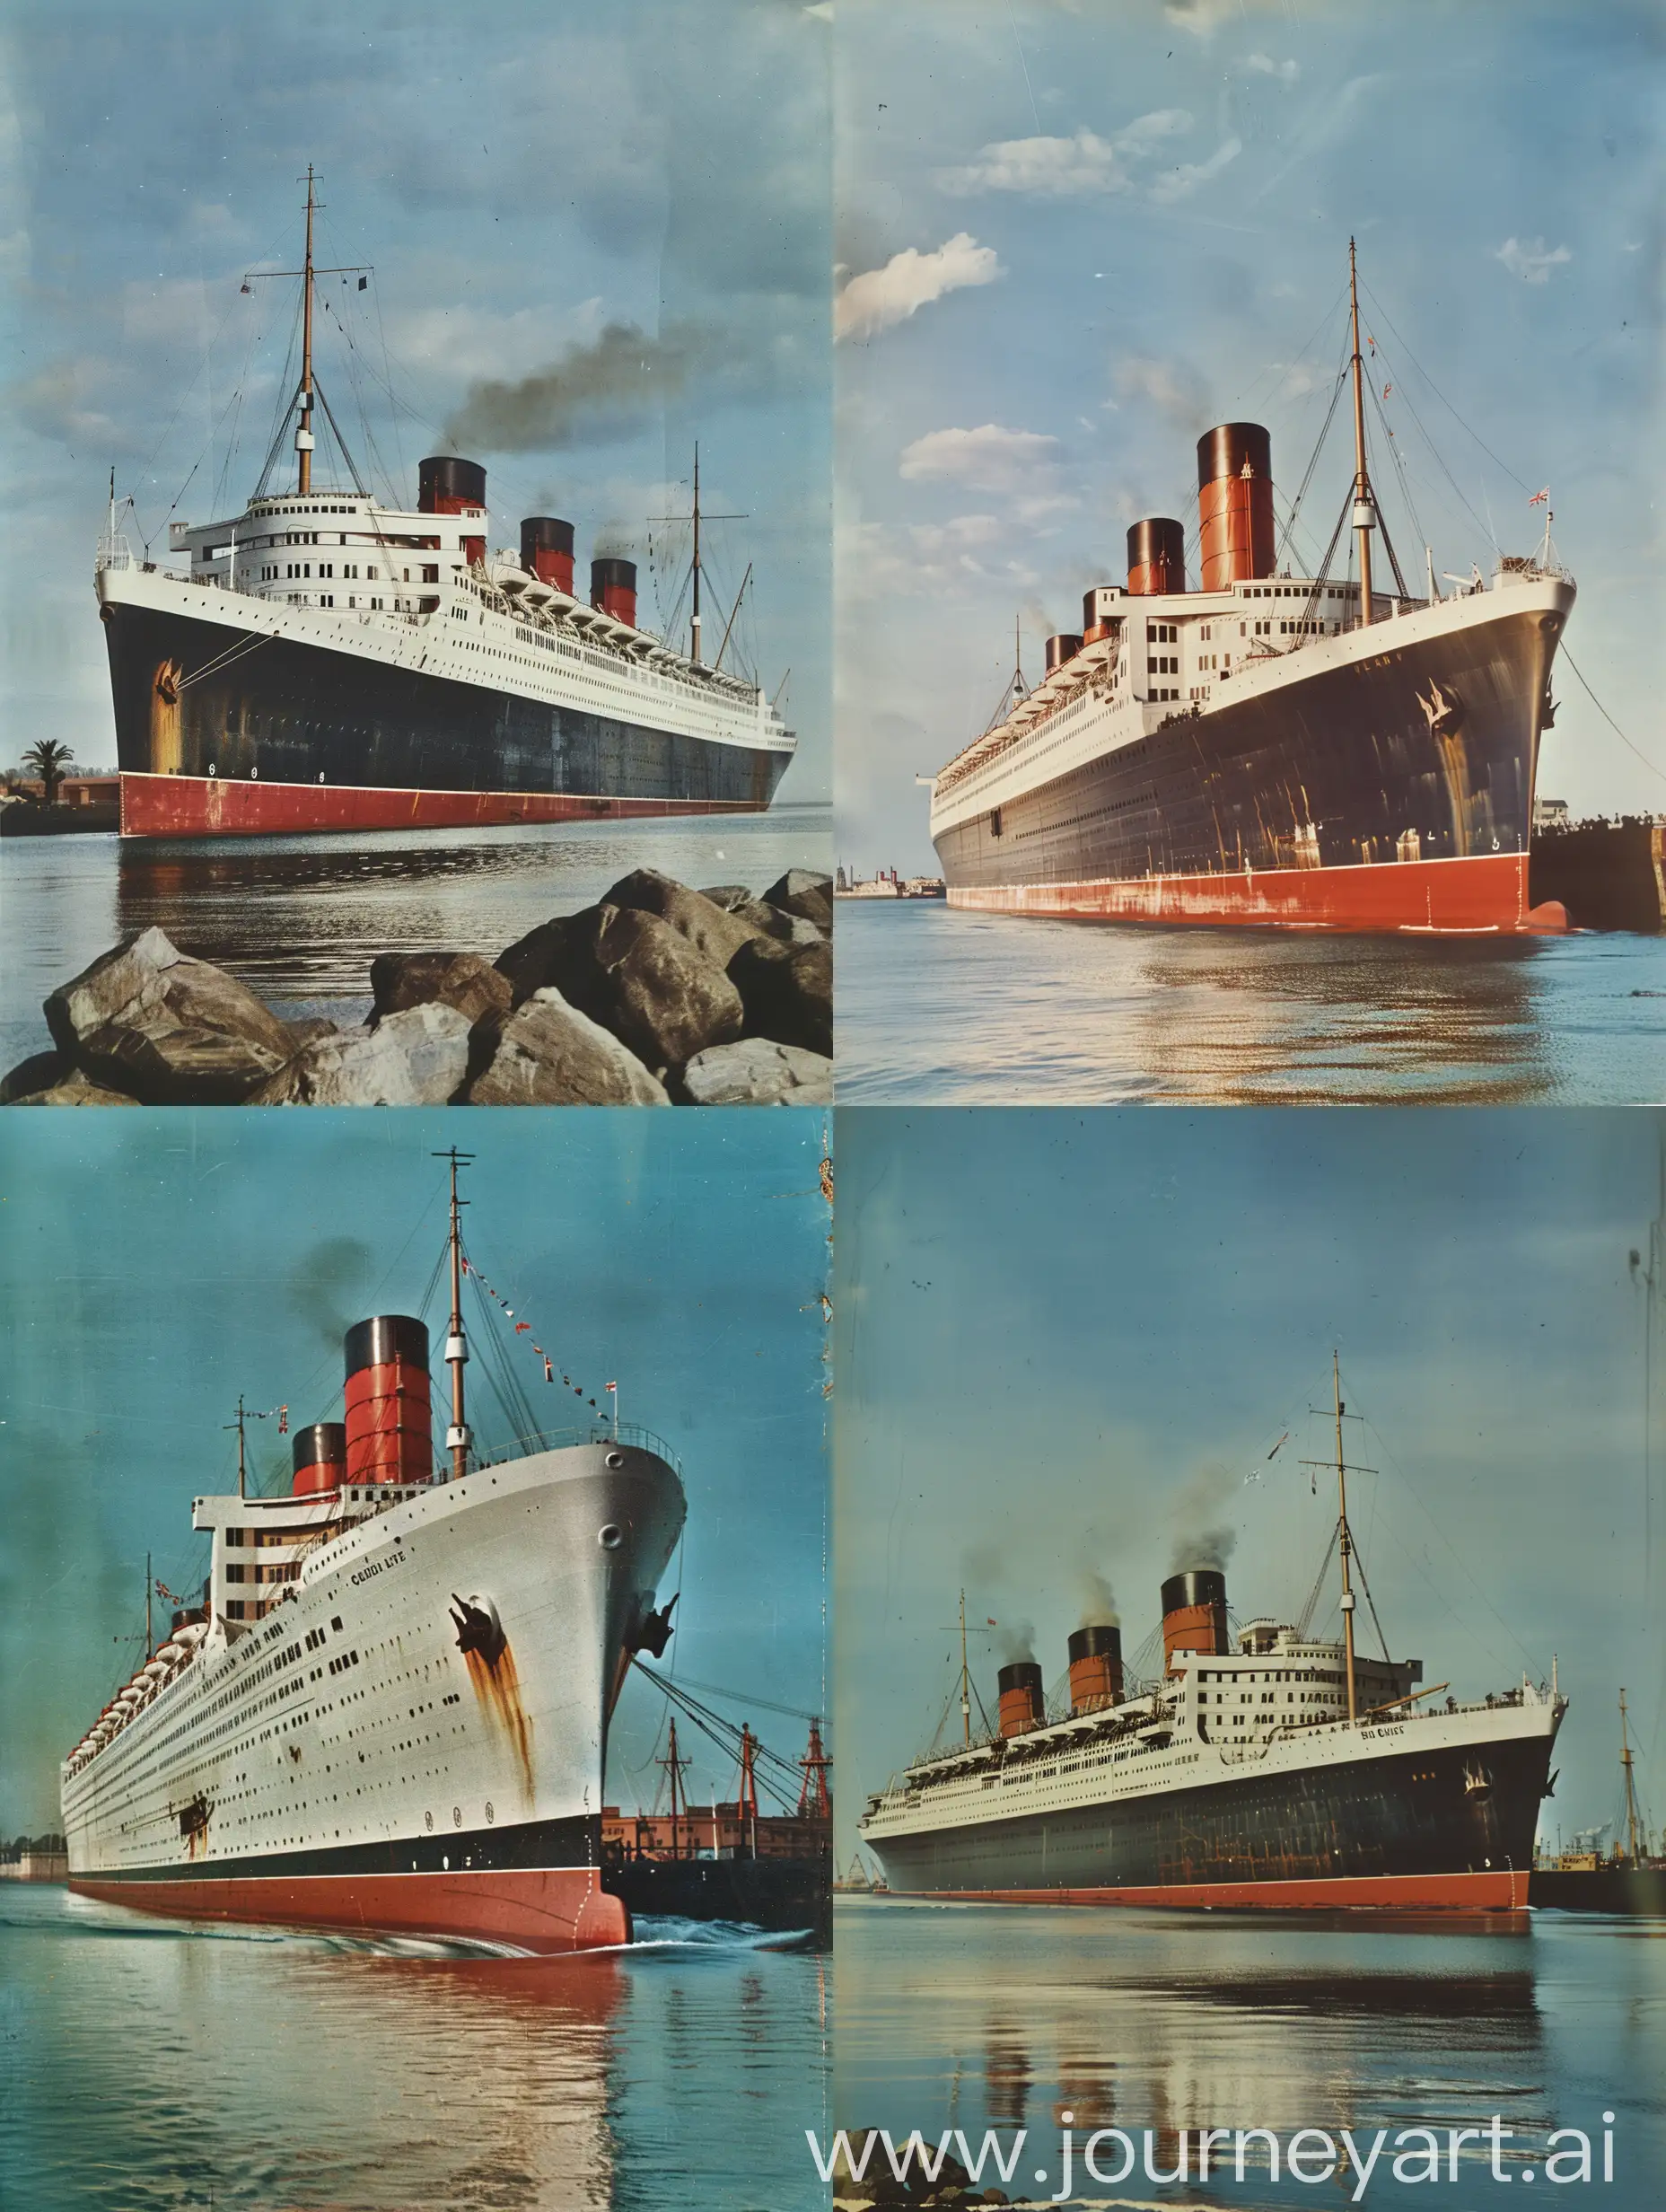 The British liner RMS Queen Mary, leaving a ship port, clan day time sky, color photograph, side view, profile pic of the ship, the ship only has three funnels, well deck on the bow, mast sitting on the forecastle, Hollywood Movie scene.